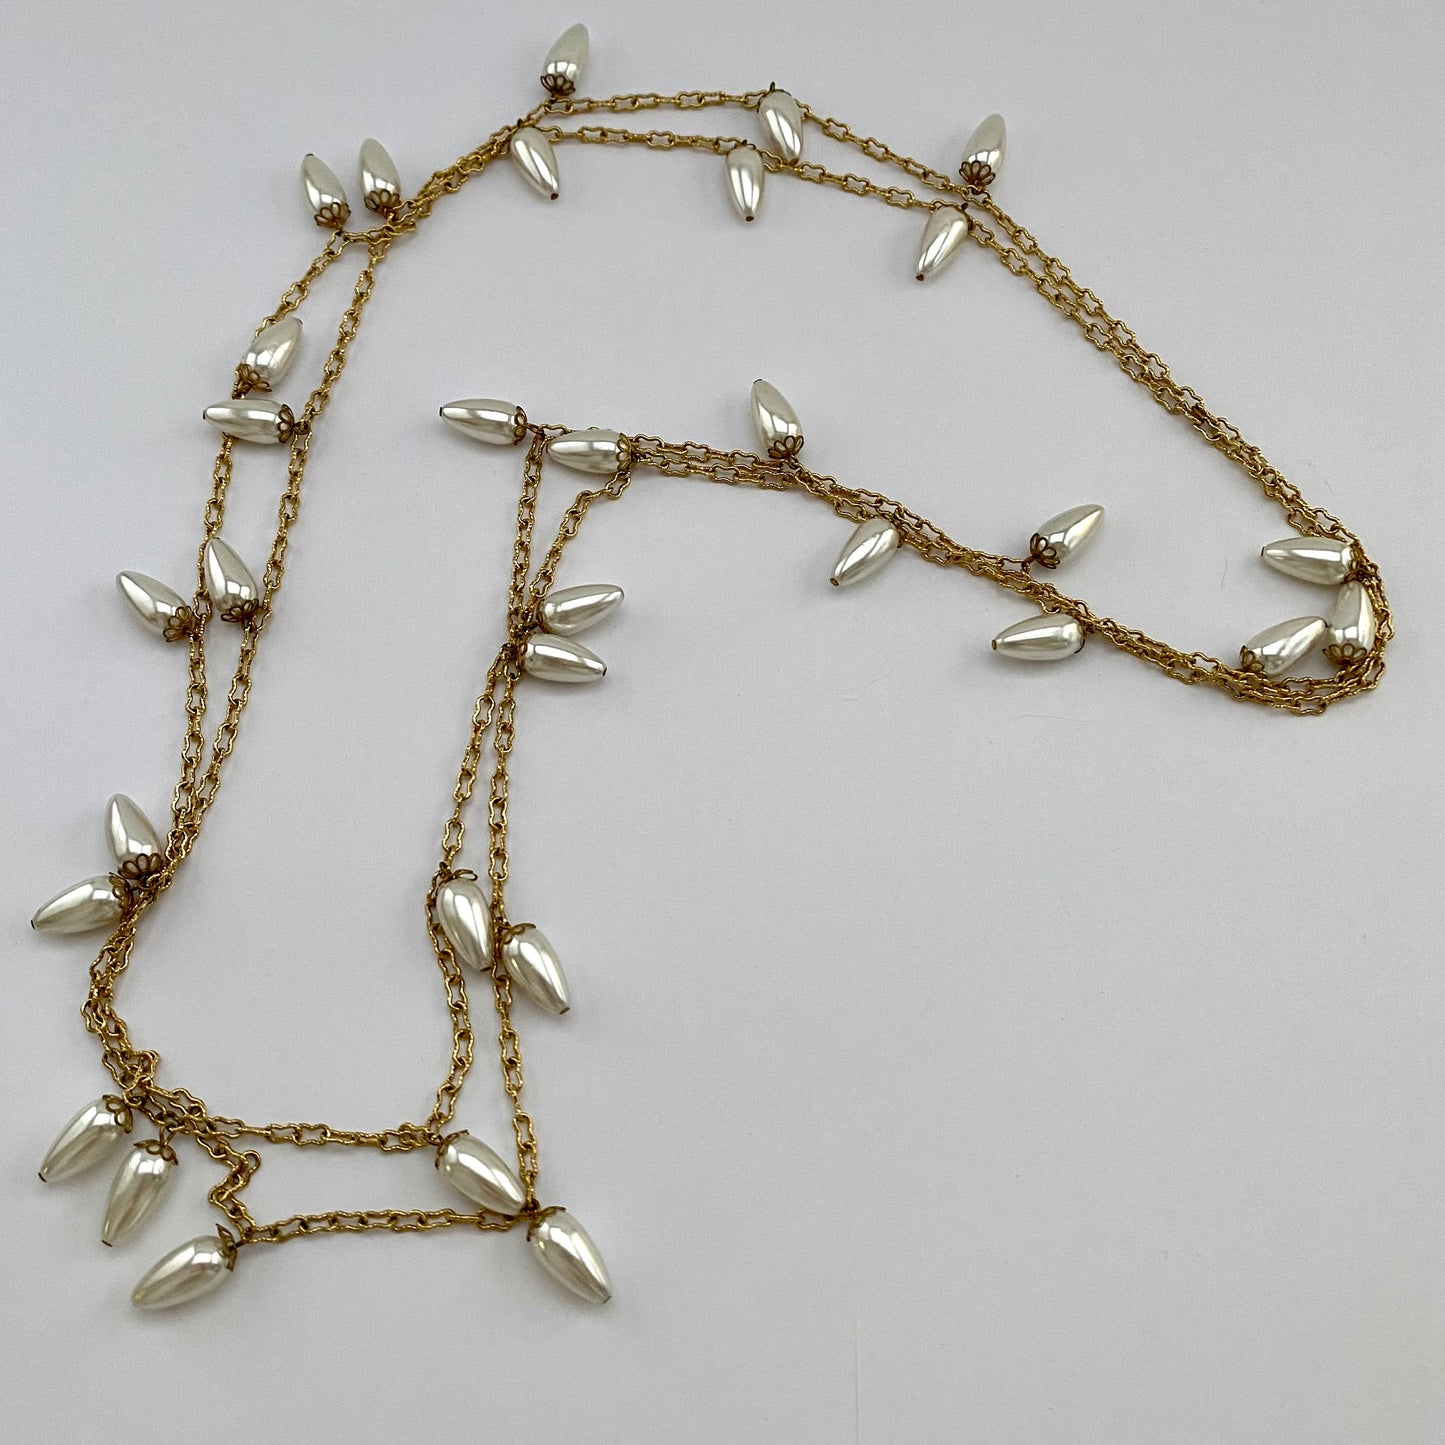 1980s Double Strand Faux Pearl Necklace